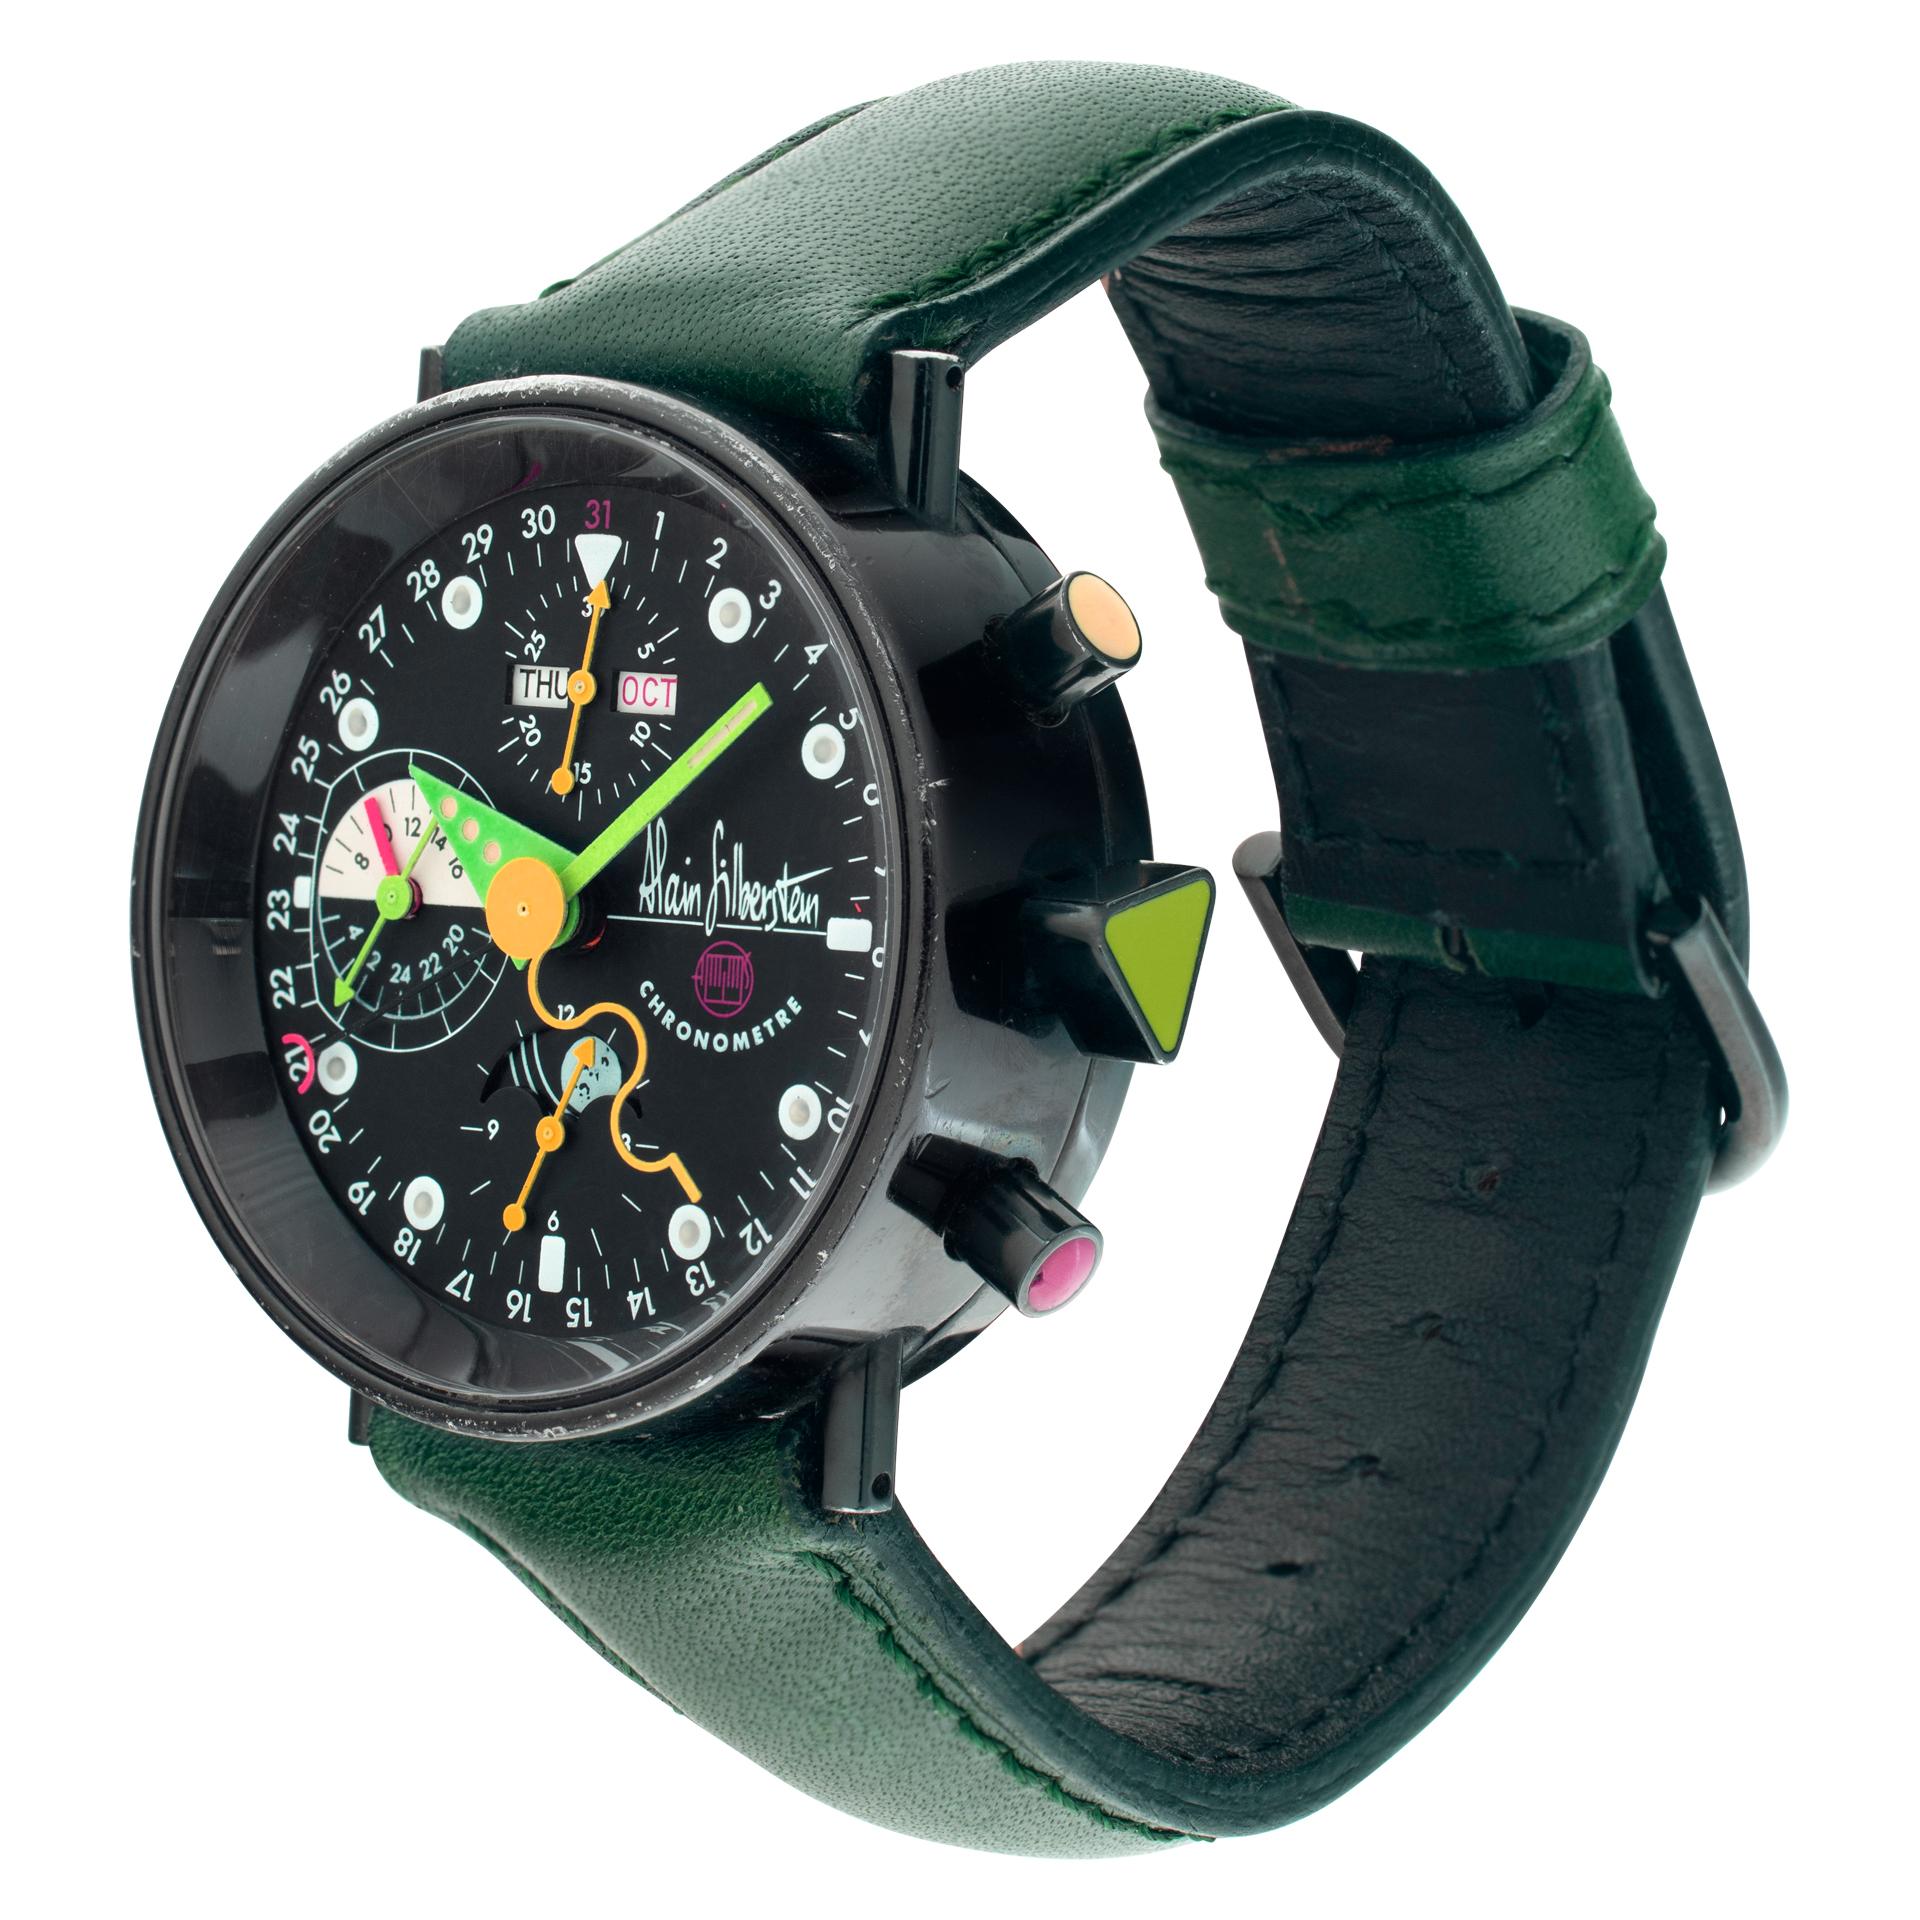 Alain Silberstein Krono 2 in Black PVD stainless steel on a green leather strap. Limited Edition of 999 pieces. Automatic movement under glass w/ date, day, month, chronograph and moonphase. 38 mm case size. With box and papers. Also comes with